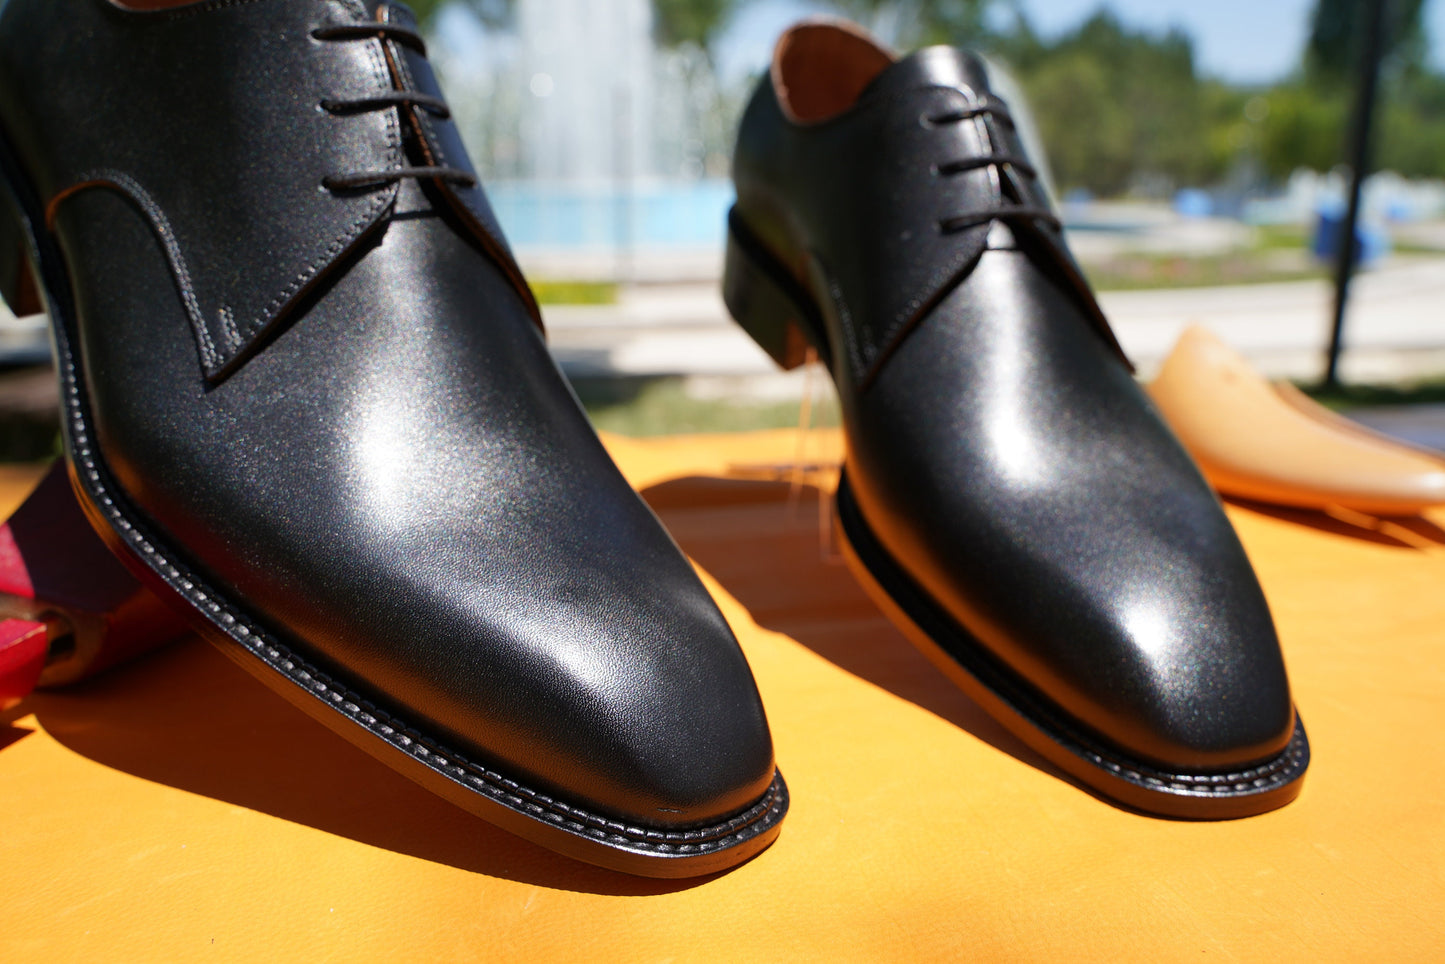 Whole Cut Black Oxford Men Shoes Leather Handmade Customized Made To Order Shoes Men Oxford Shoes Casual Men Shoes Premium Quality